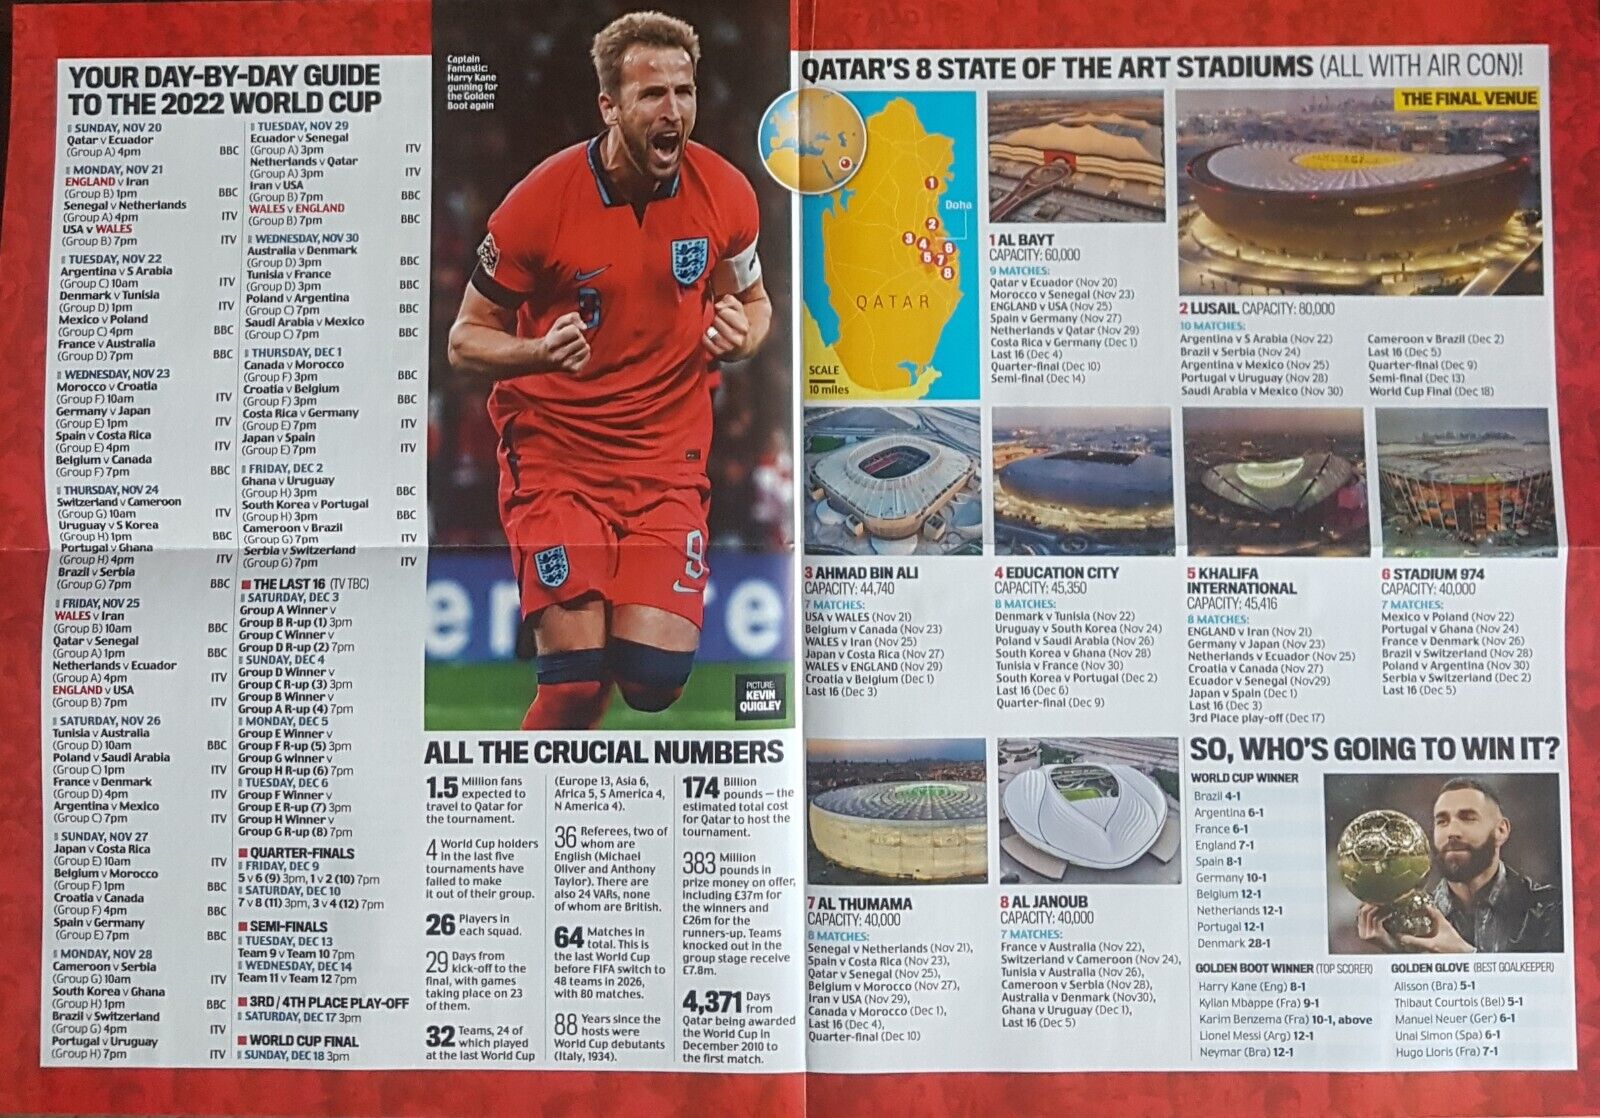 THE DAILY MAIL - QATAR 2022 WORLD CUP WALLCHART / TV GUIDE - DOUBLE SI